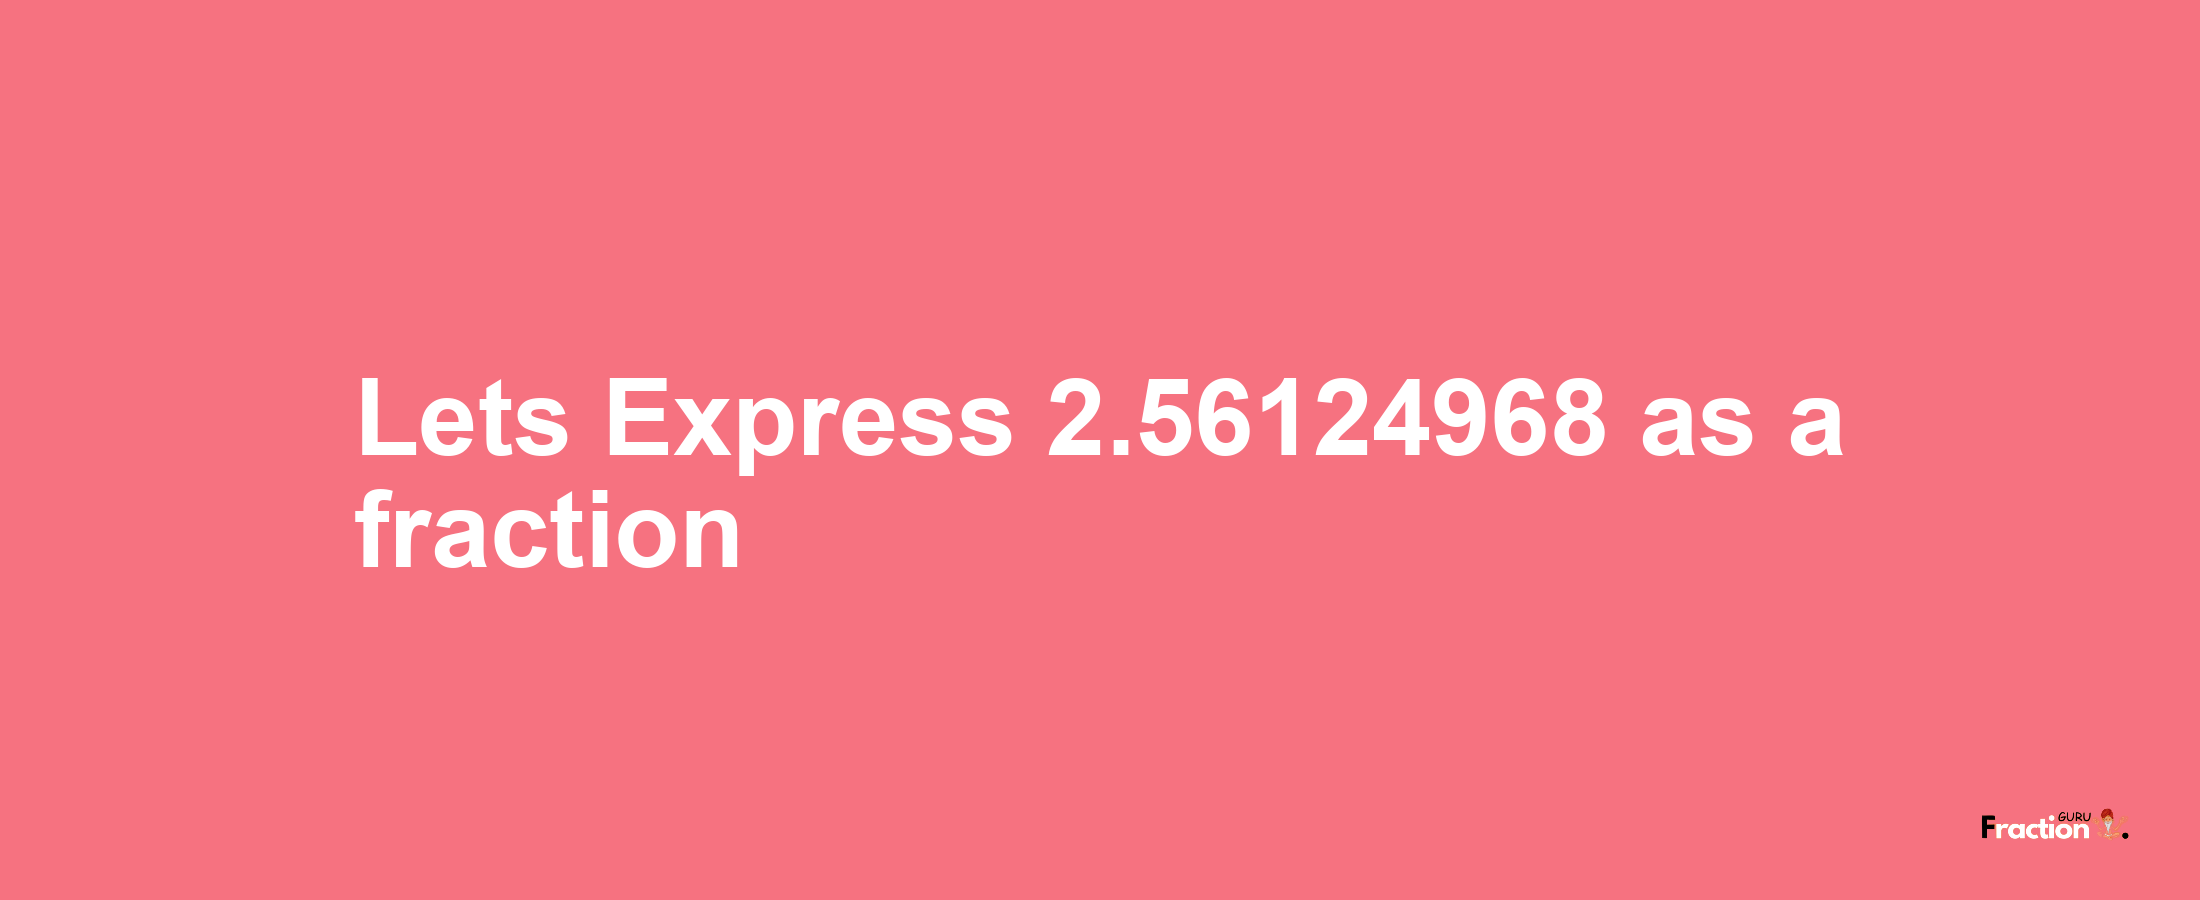 Lets Express 2.56124968 as afraction